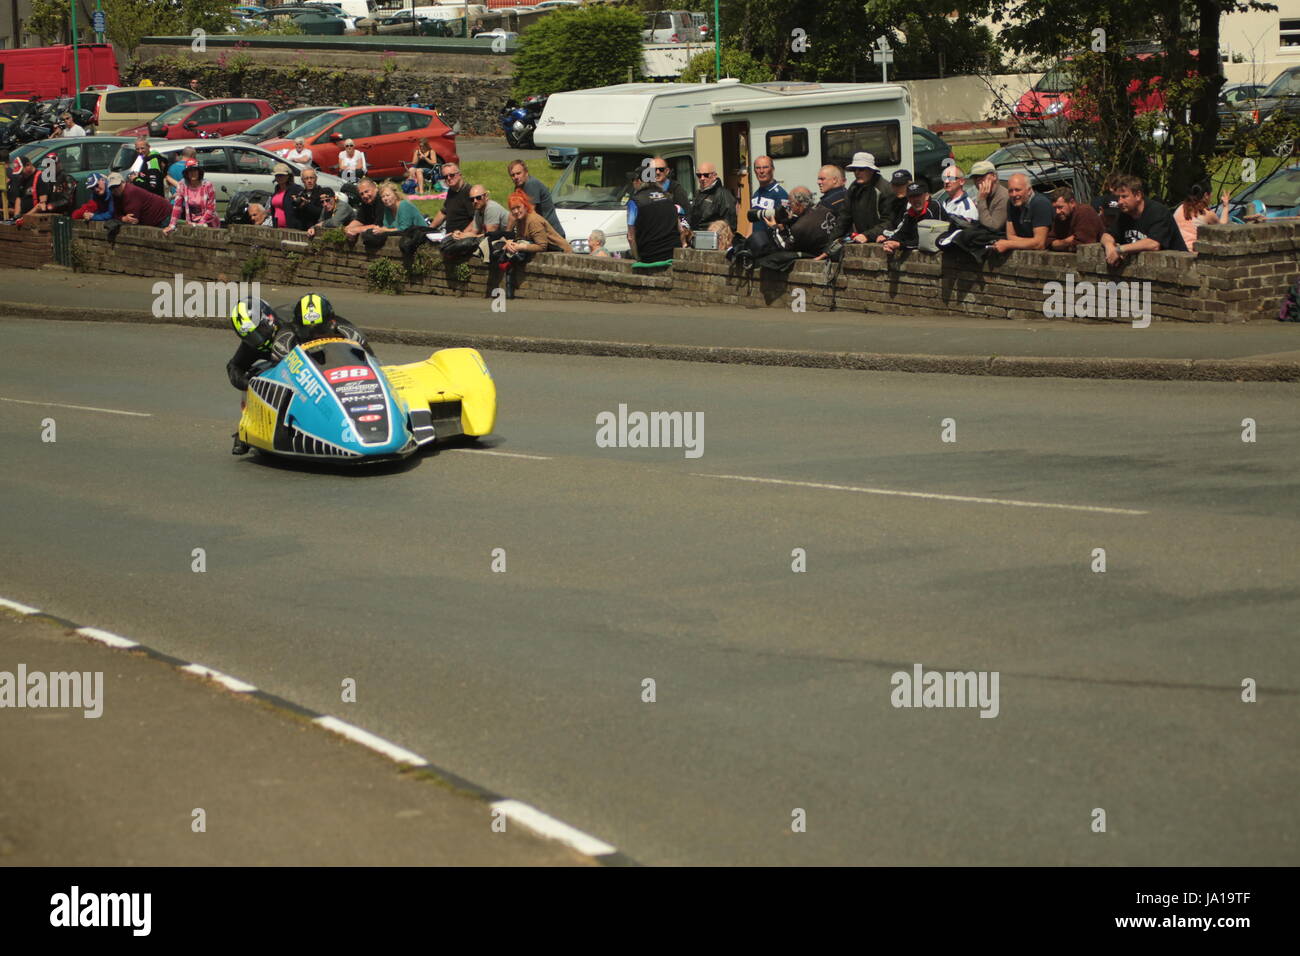 Isle of Man TT Races, Sidecar Qualifying Practice Race, Saturday 3 June 2017. Sidecar qualifying session. Number 38, Roy Tansley and Darren Prentis on their 675cc MR Equipe Triumph from the Proshift.com / Mike Austin Racing team from Derby, UK. Credit: Eclectic Art and Photography/Alamy Live News Stock Photo